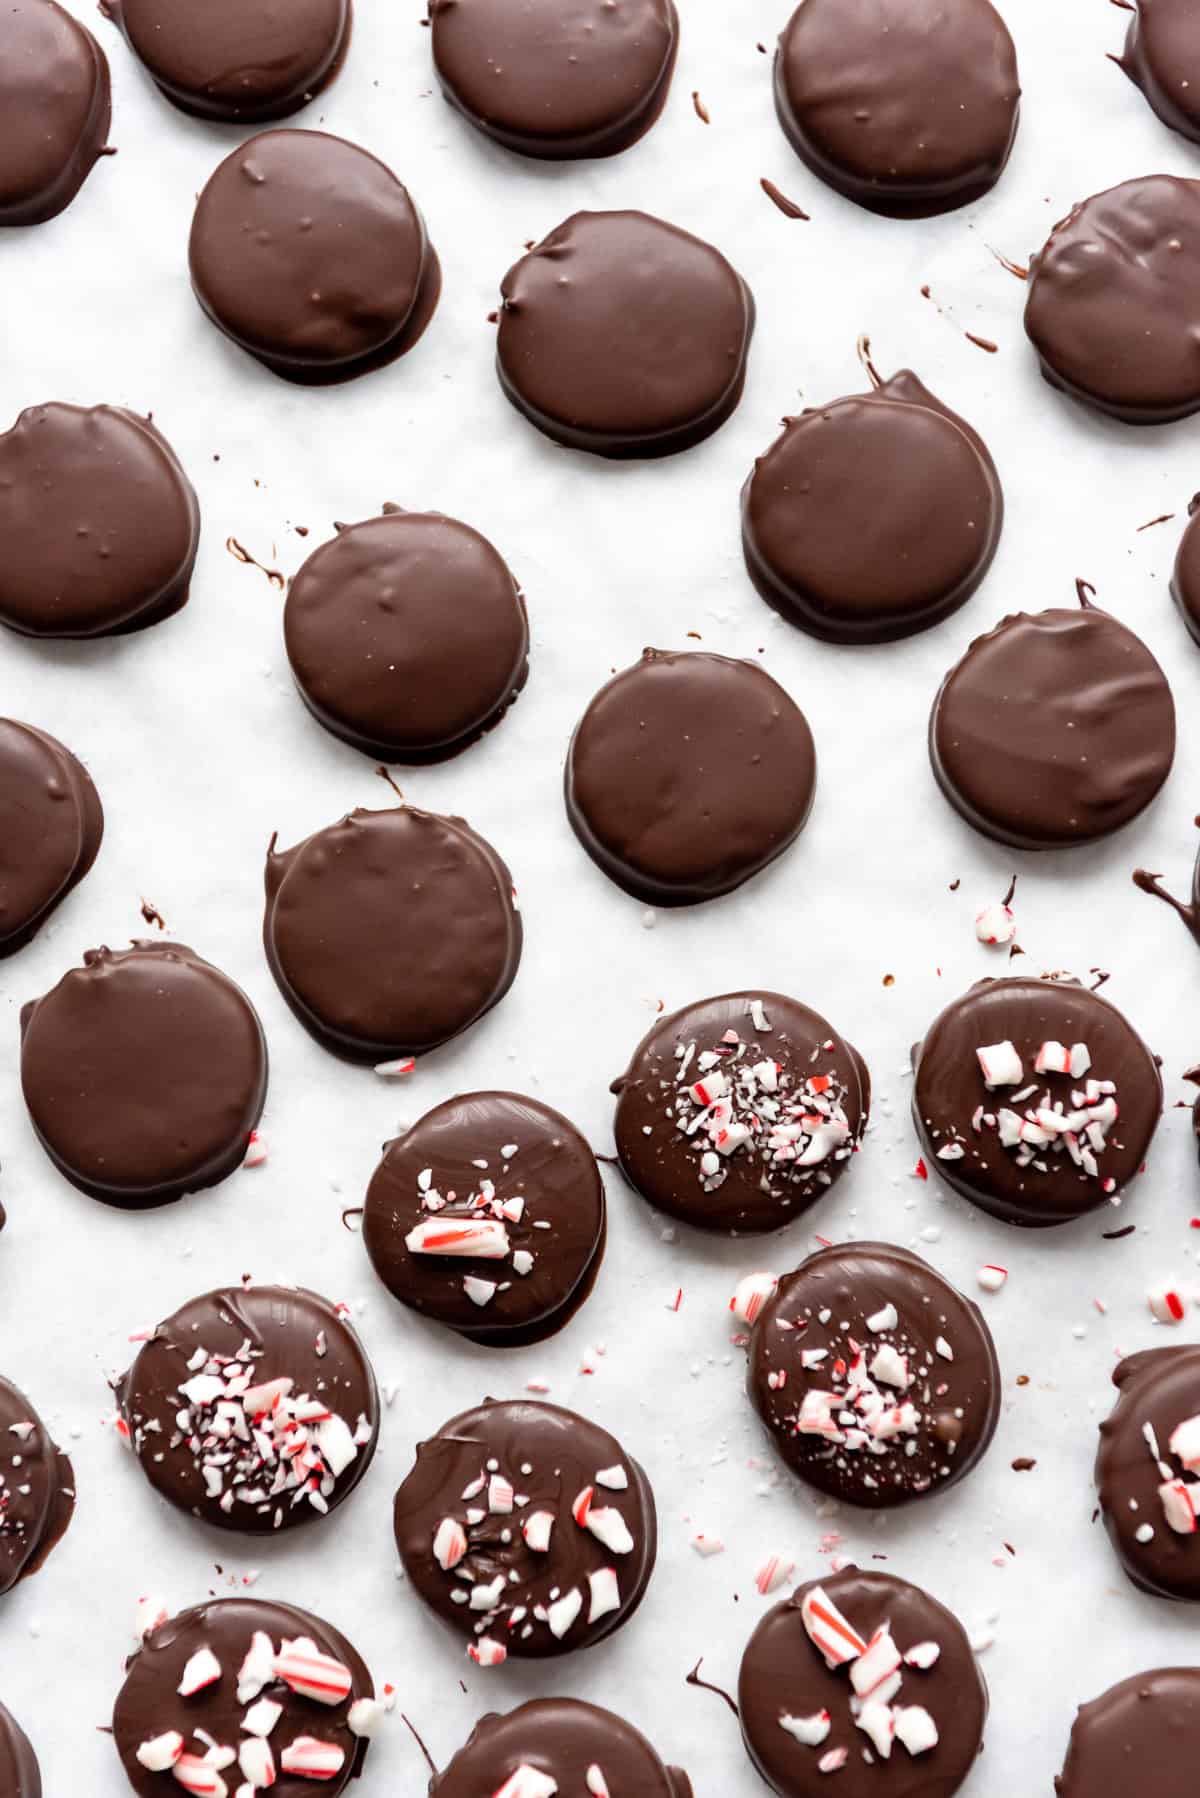 Homemade peppermint patties setting up on a baking sheet so the chocolate can harden.